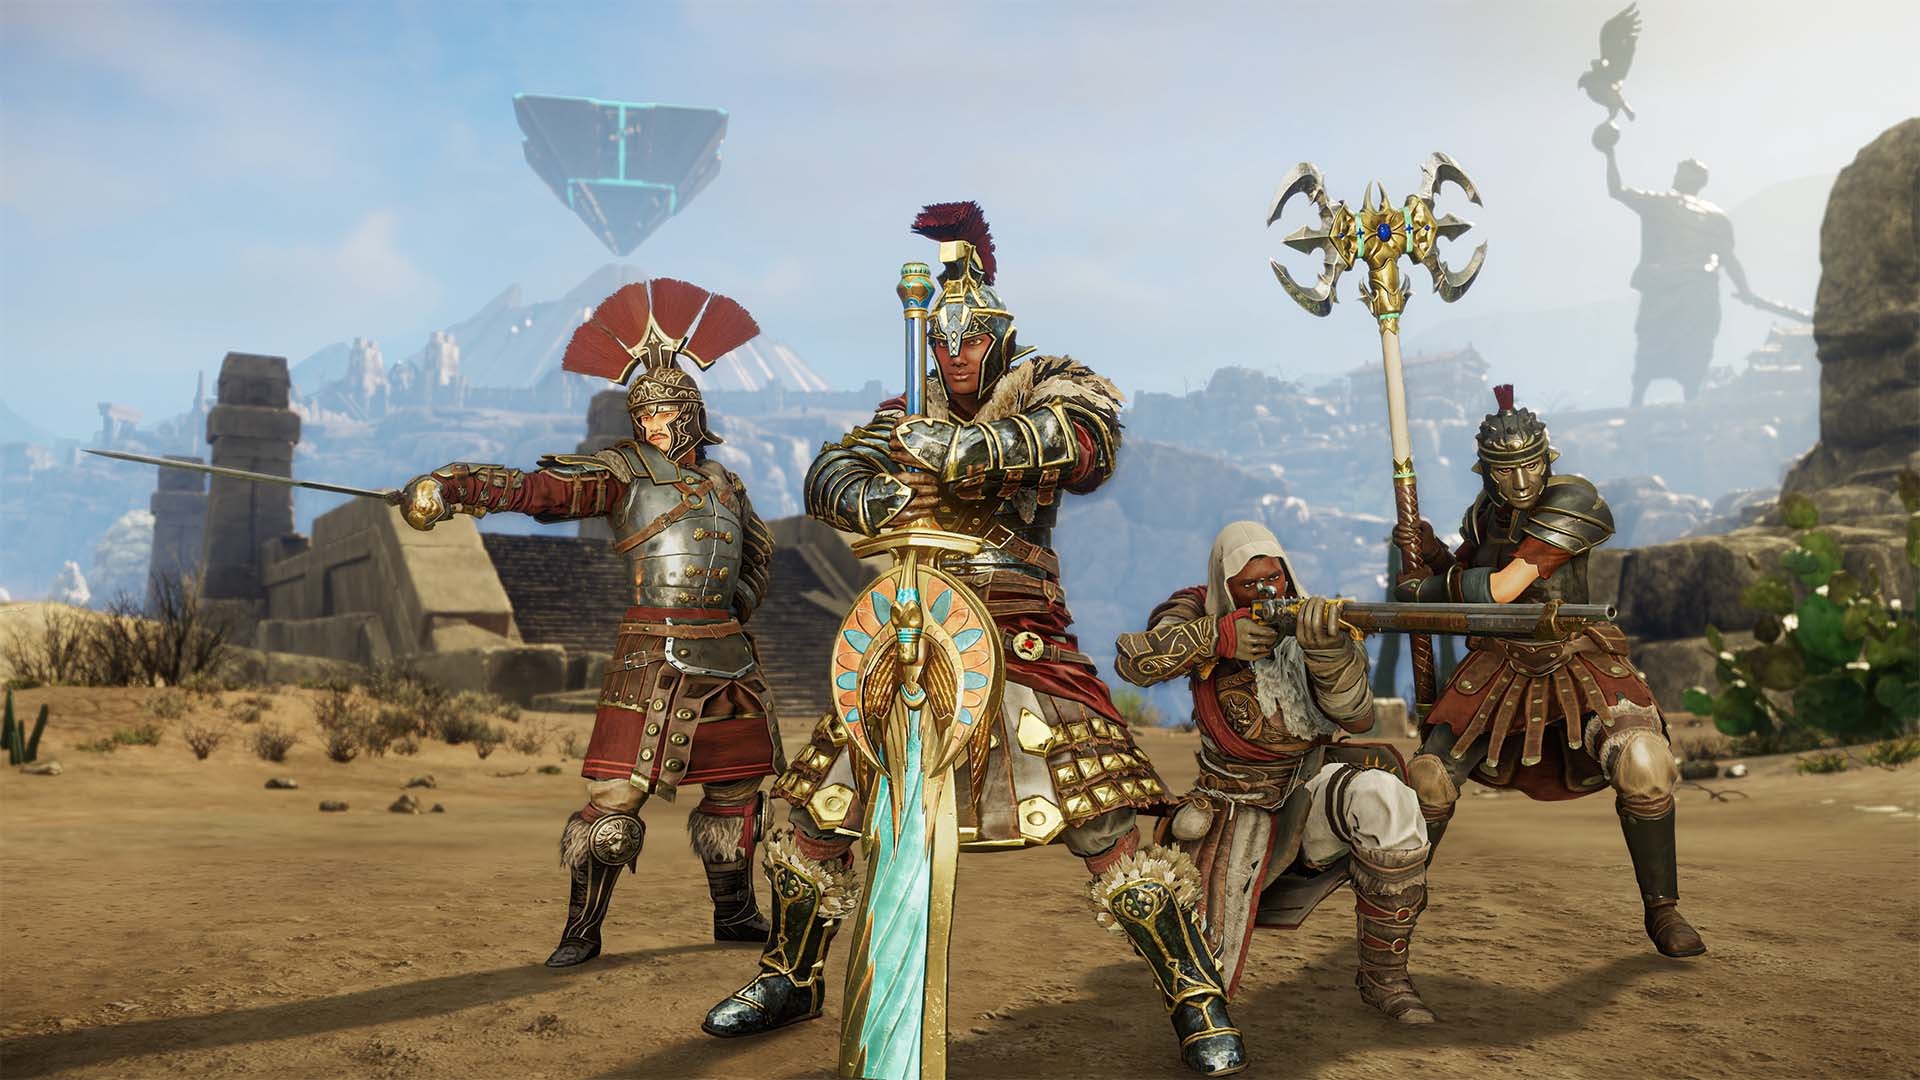 New World players posing in the new Brimstone Sands region.